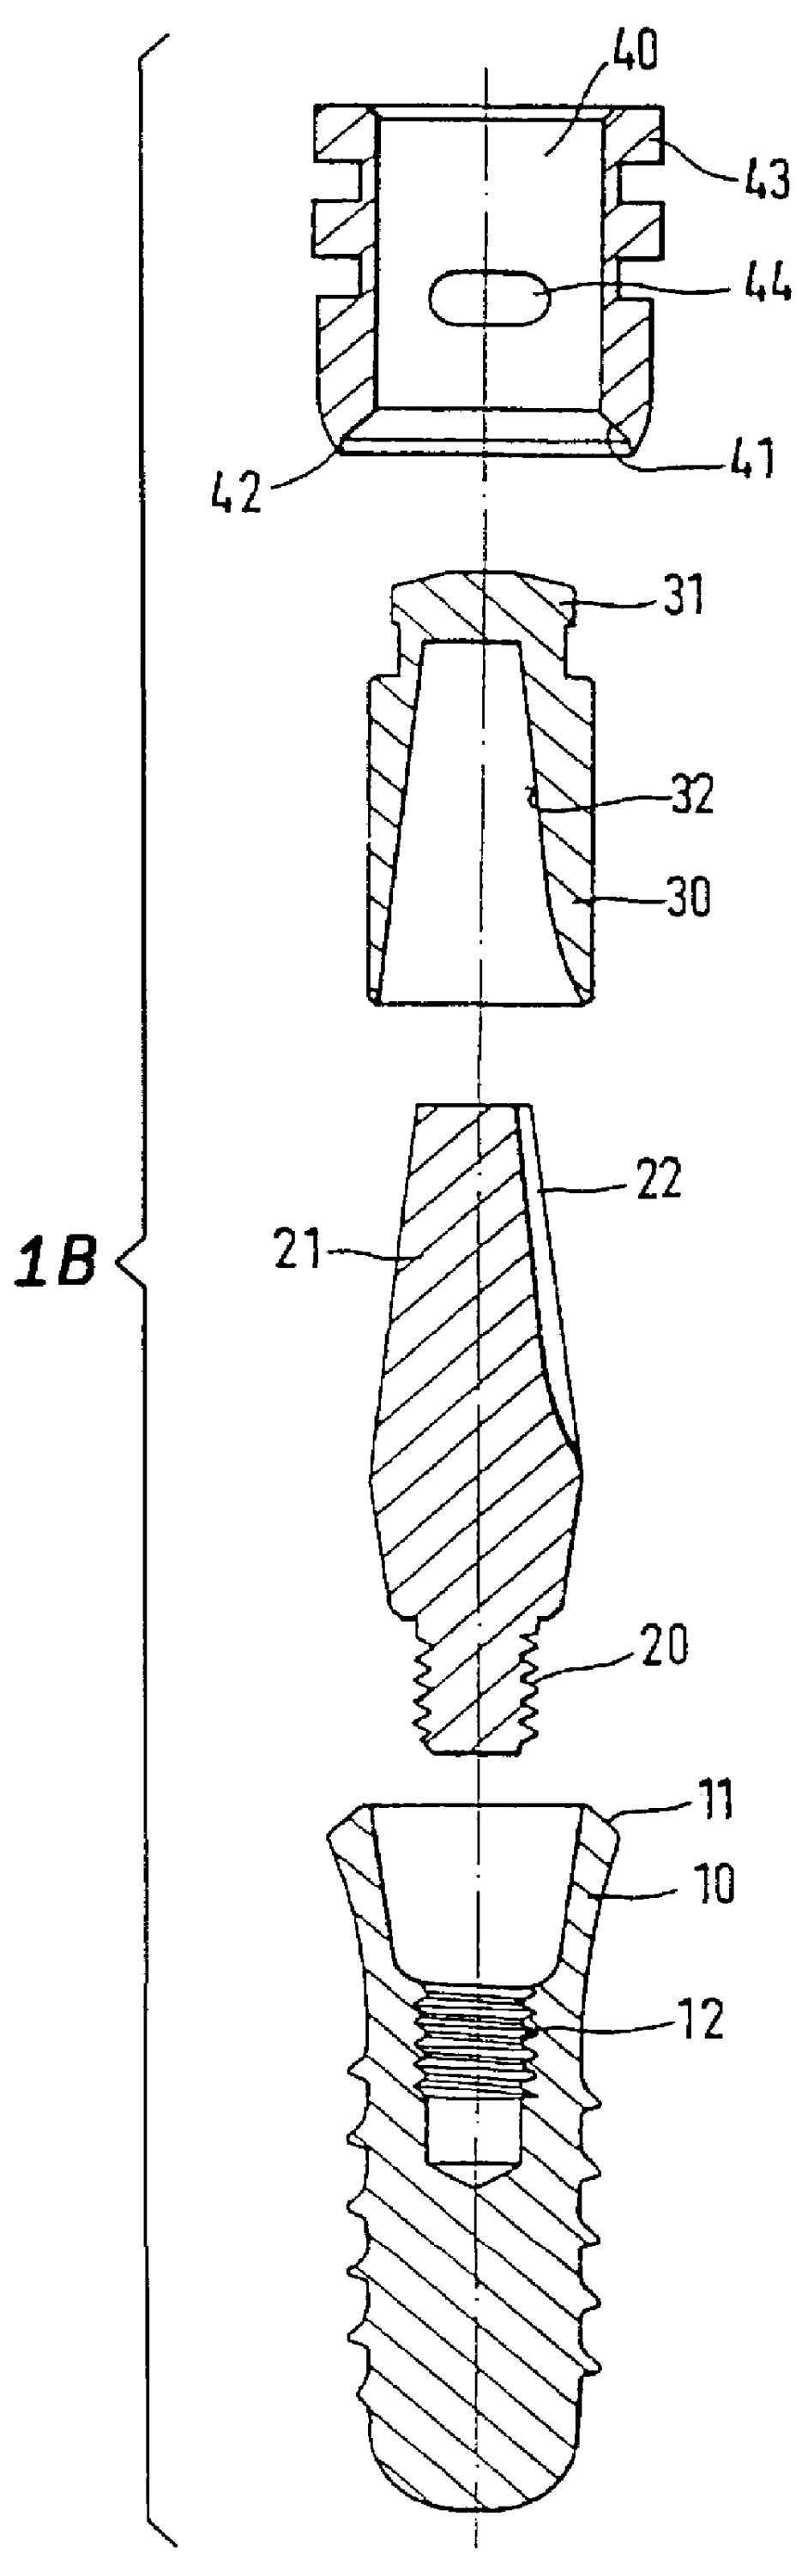 Impression system for an end of an implant projecting from a human tissue structure